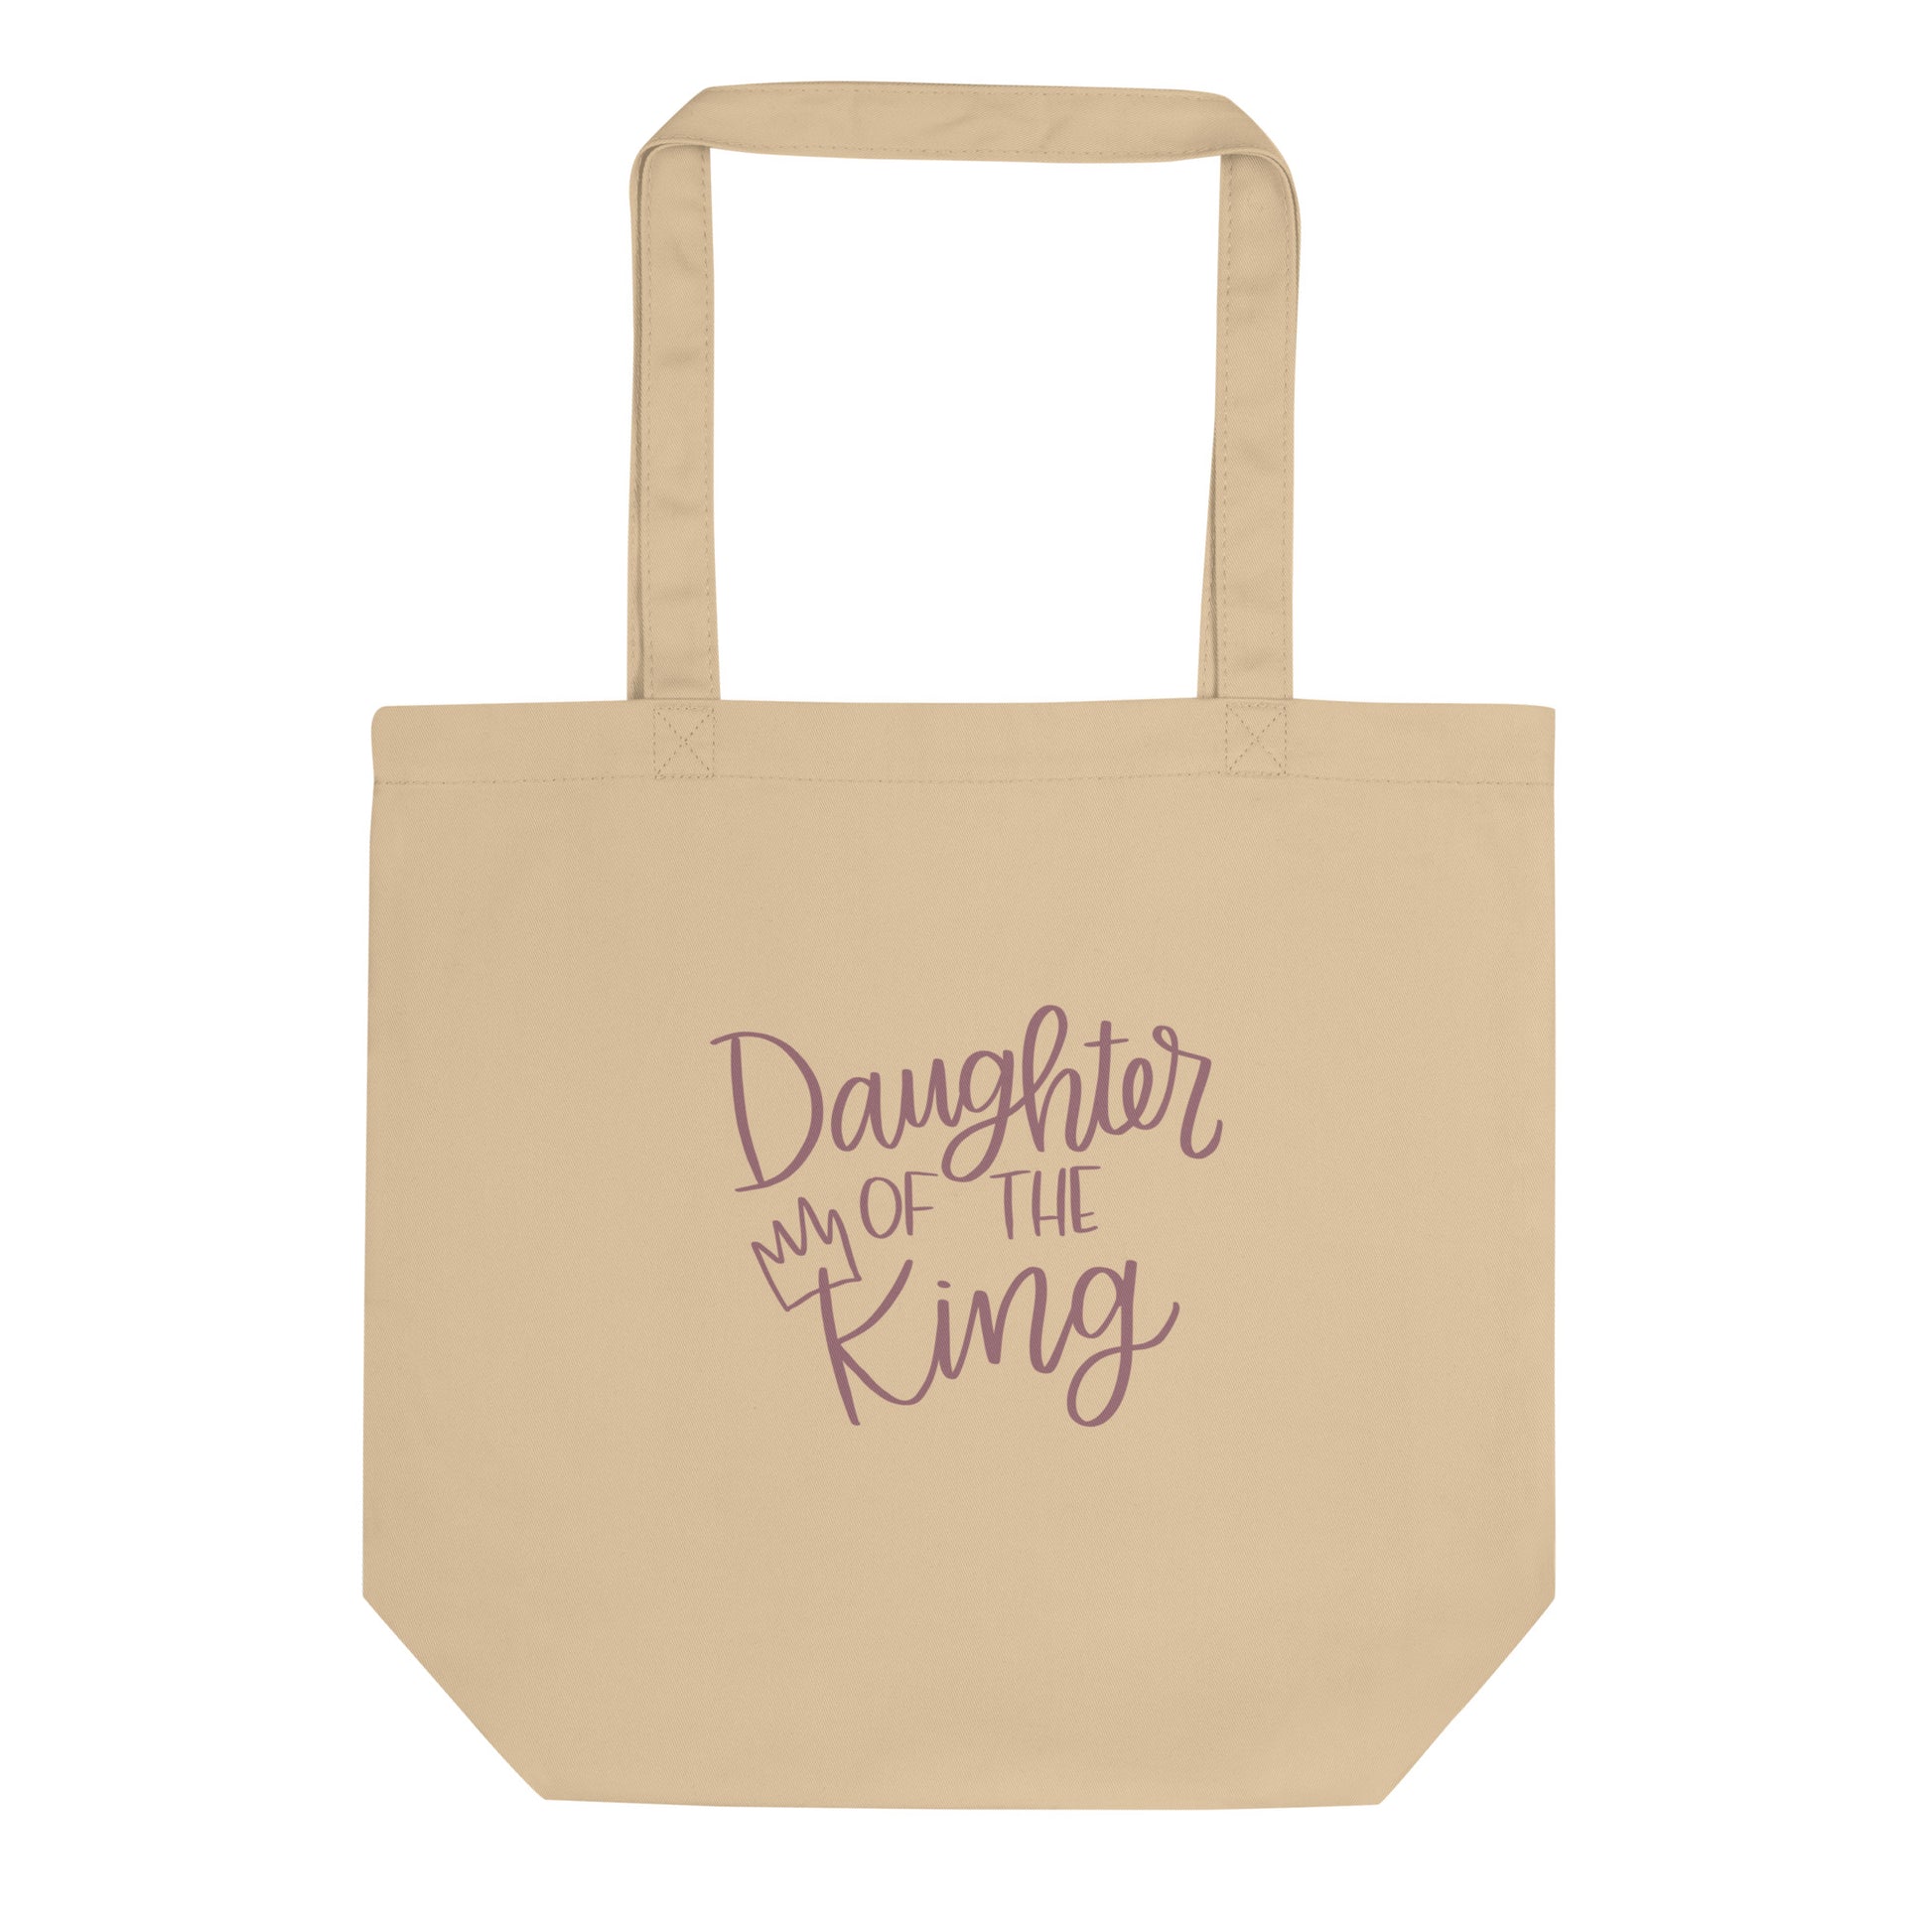 Daughter of the King Tote Bag - Friends of the Faith